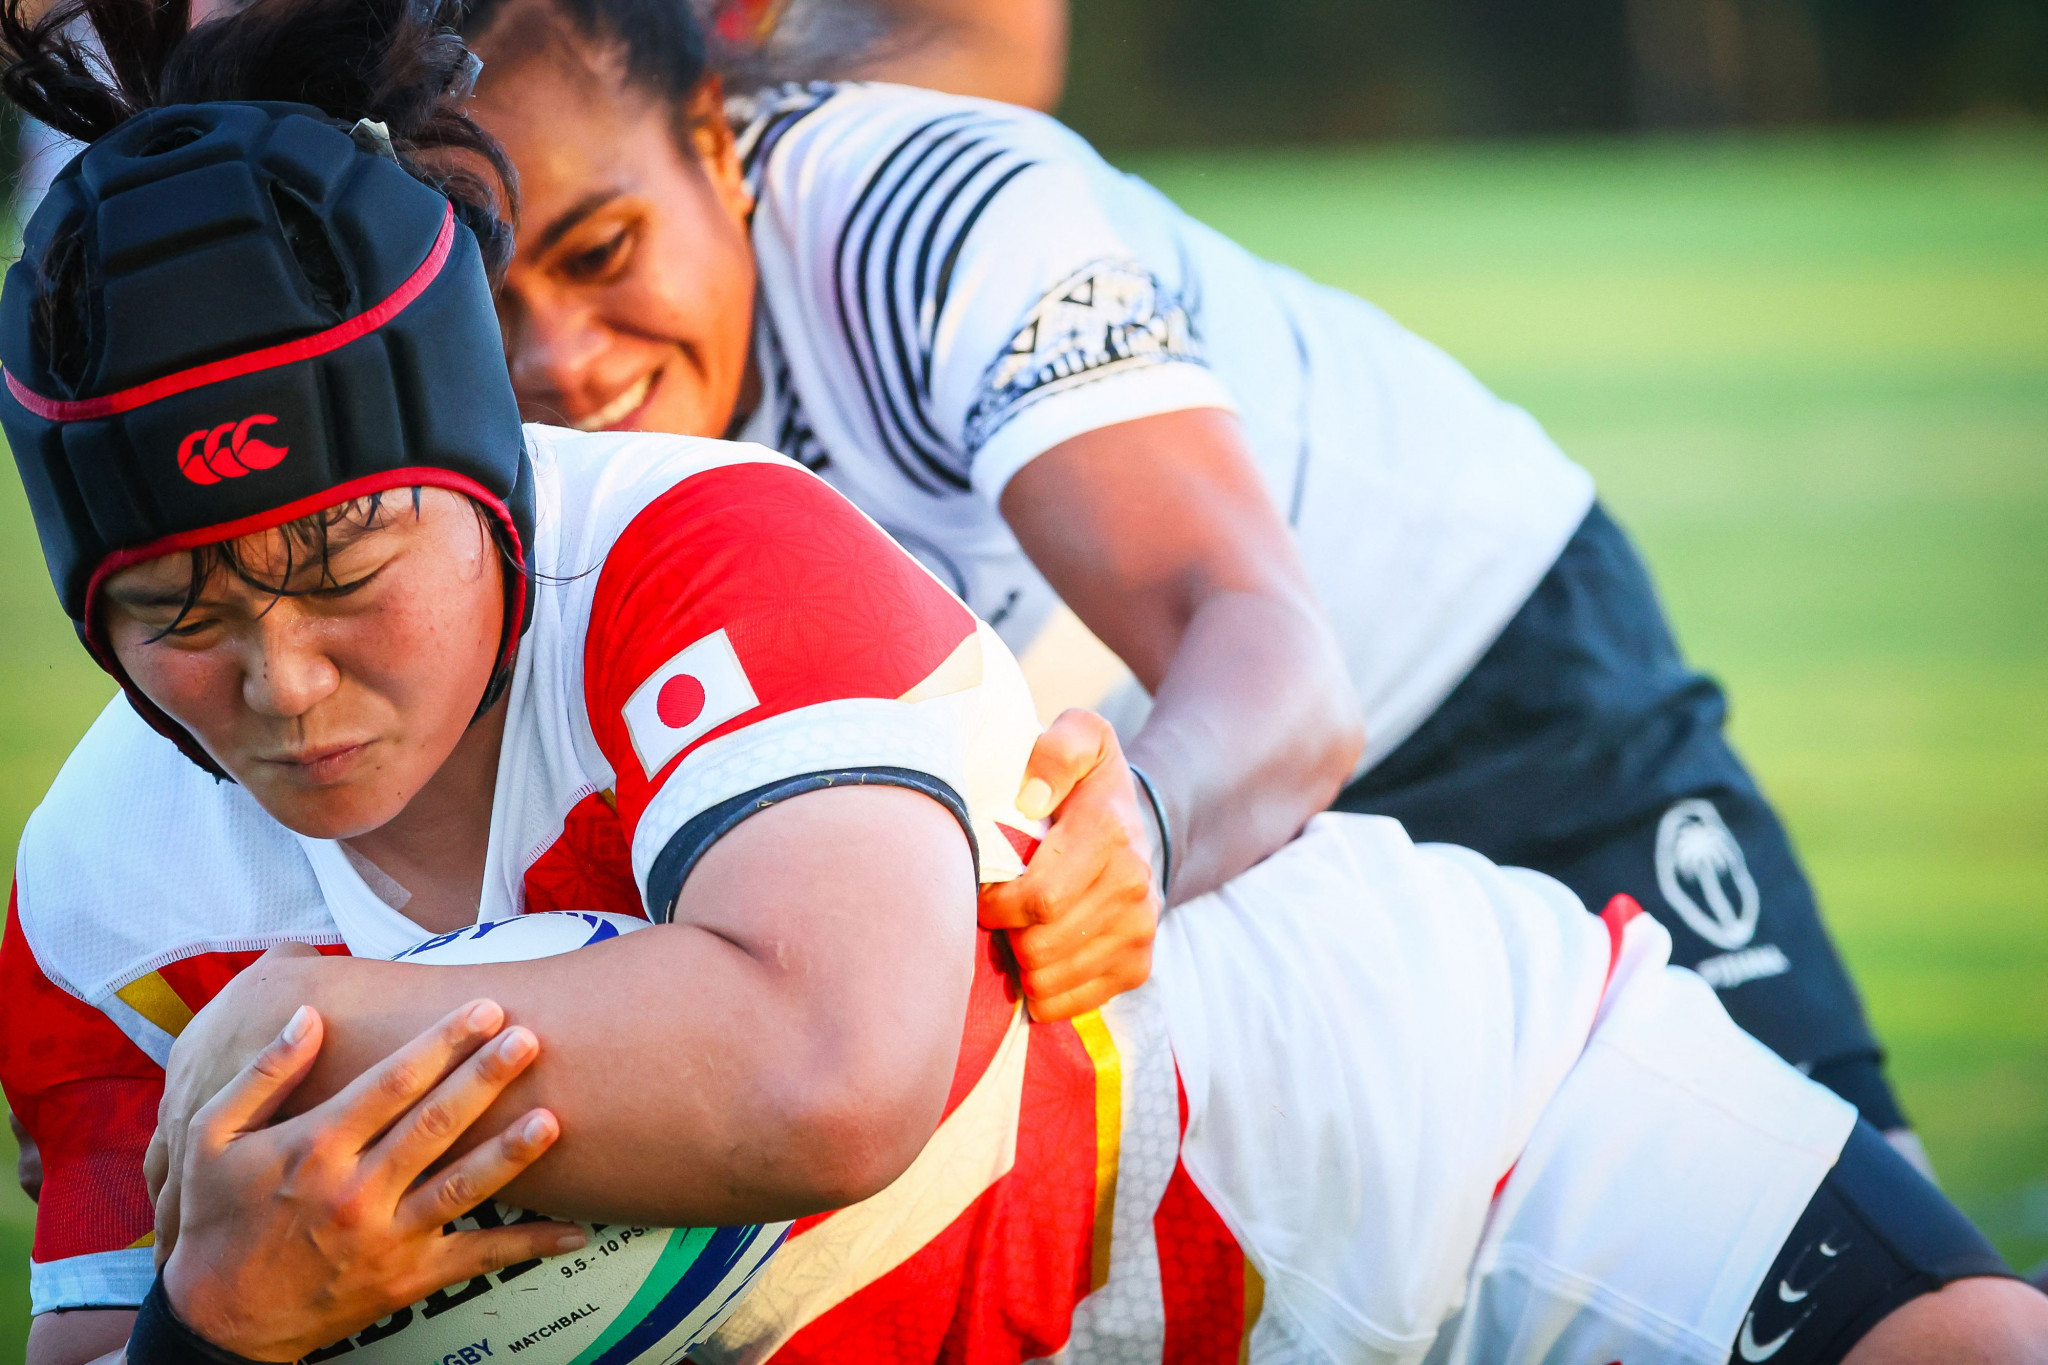 Ayano Nagai scored two tries for Japan in their 72-0 thrashing of Kazakhstan in the Asia Rugby Women's Championship ©Getty Images